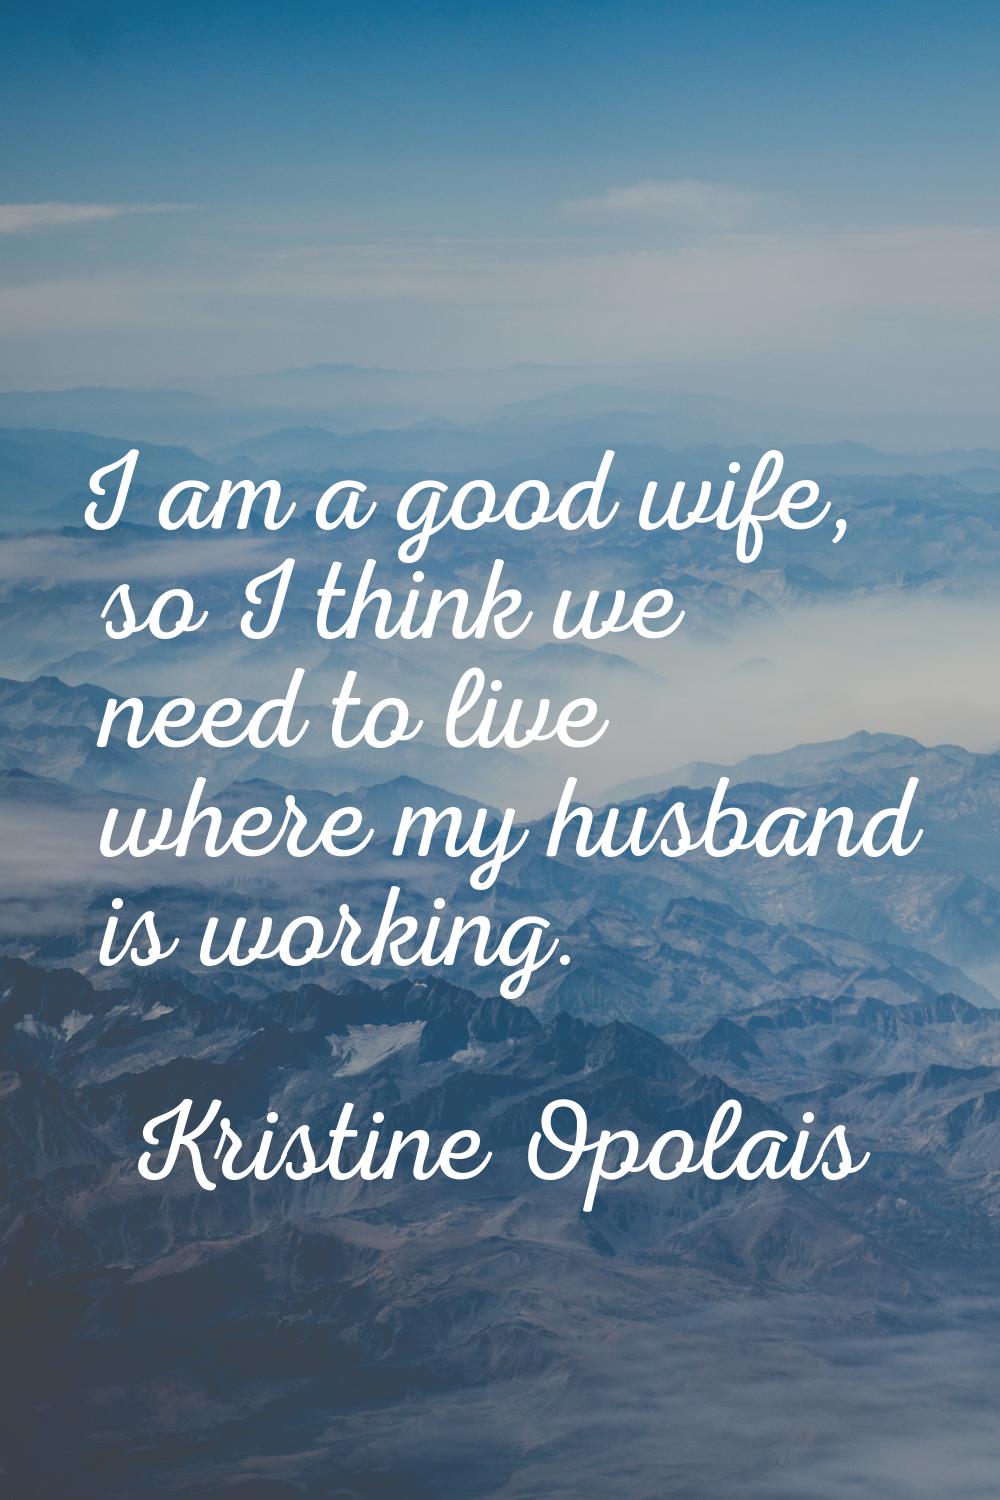 I am a good wife, so I think we need to live where my husband is working.